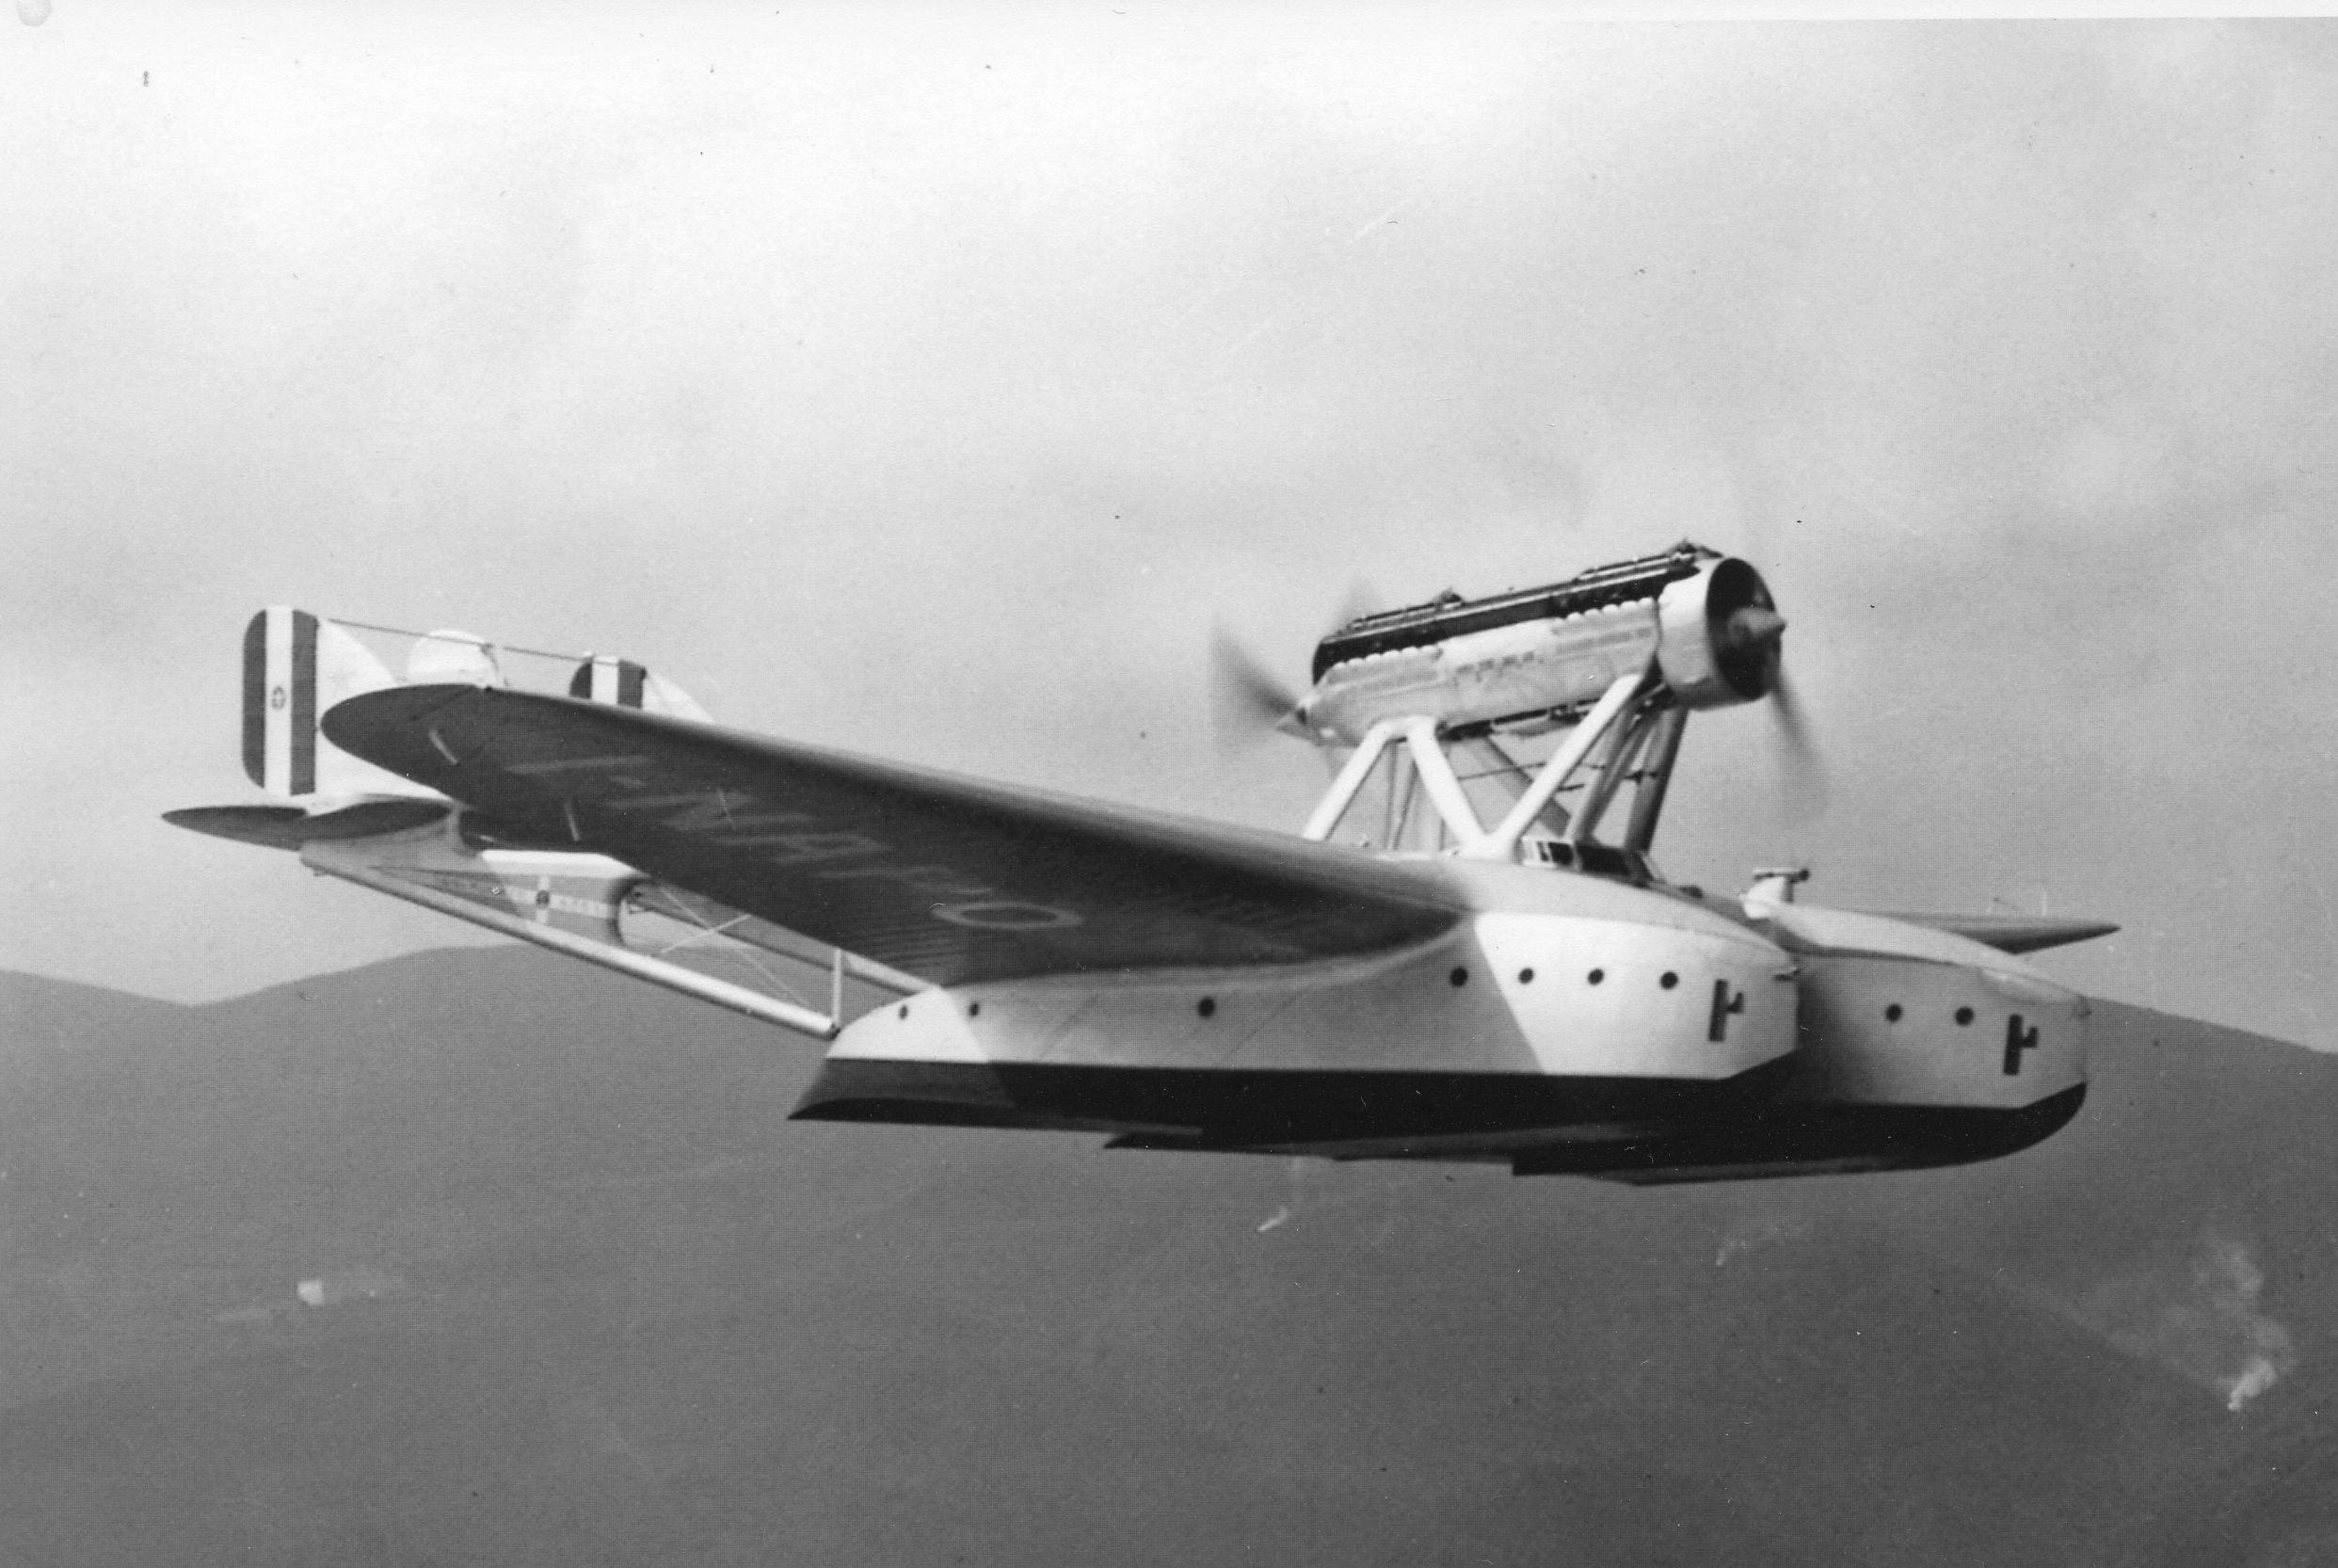  The S.55 is a two engine twin hull seaplane built by Societa Idrovolanti Alta Italia (Seaplane Company of Upper Italy). The S.55 (Santa Maria) is to be used for an around the world flight In 1927. It will have a useful load of 7,500 lbs. and a cruising speed of 100 MPH. 